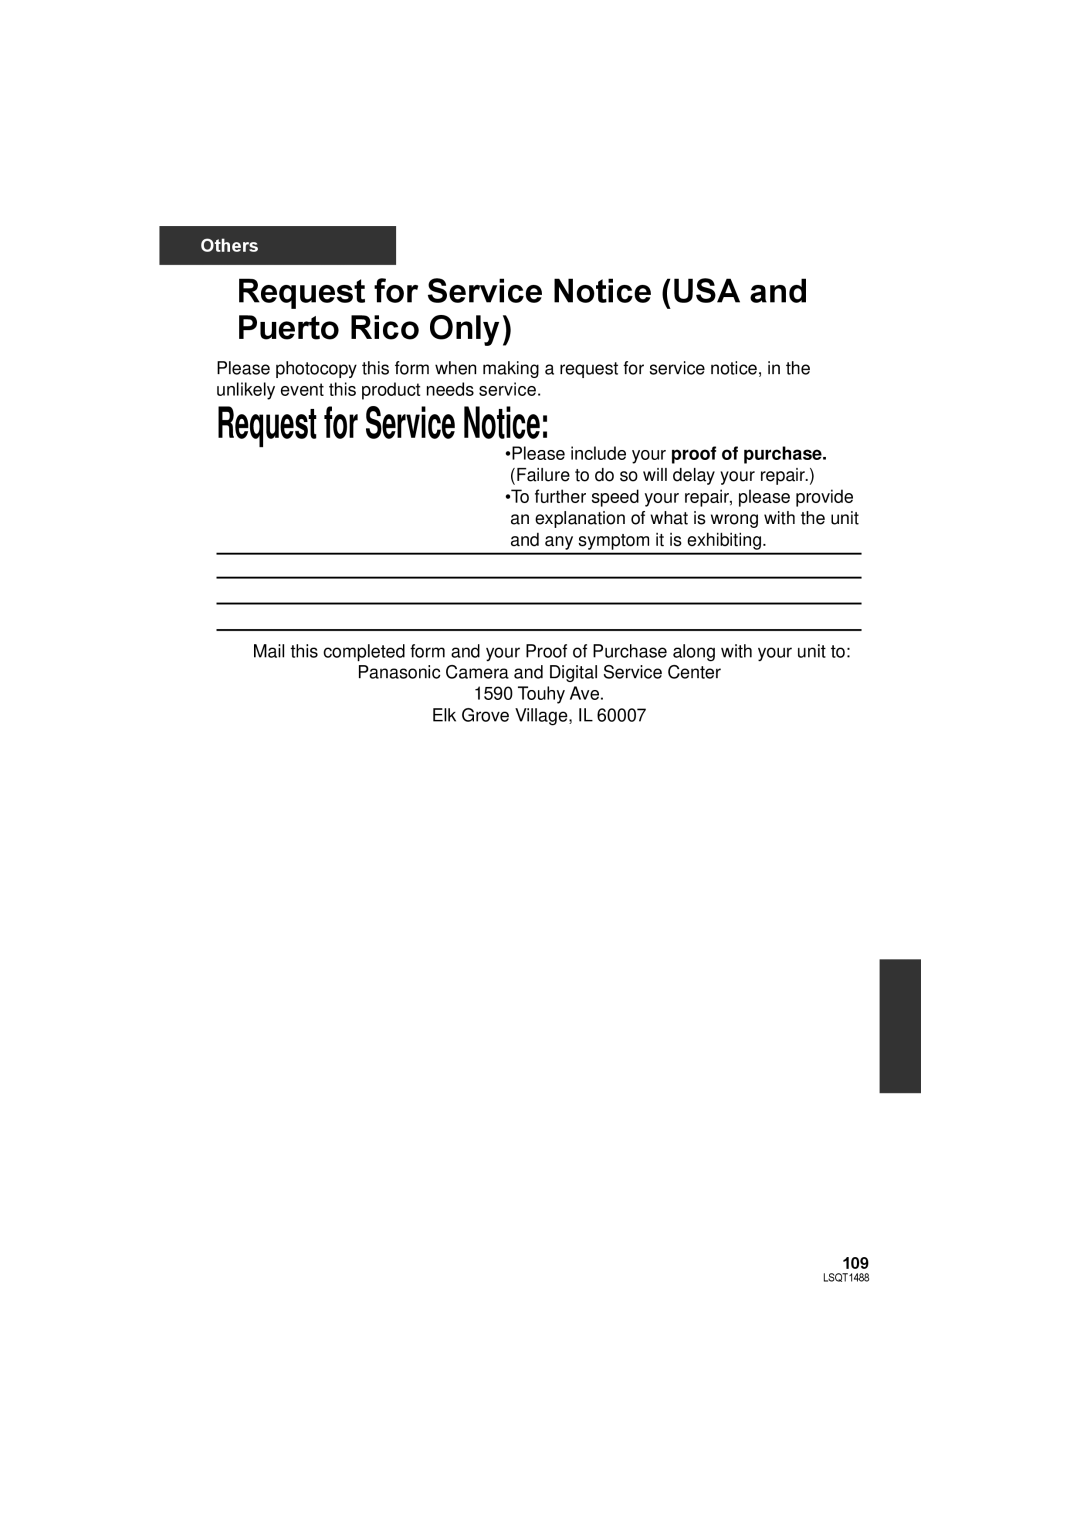 Panasonic SDR-S26PC operating instructions Request for Service Notice USA and Puerto Rico Only 